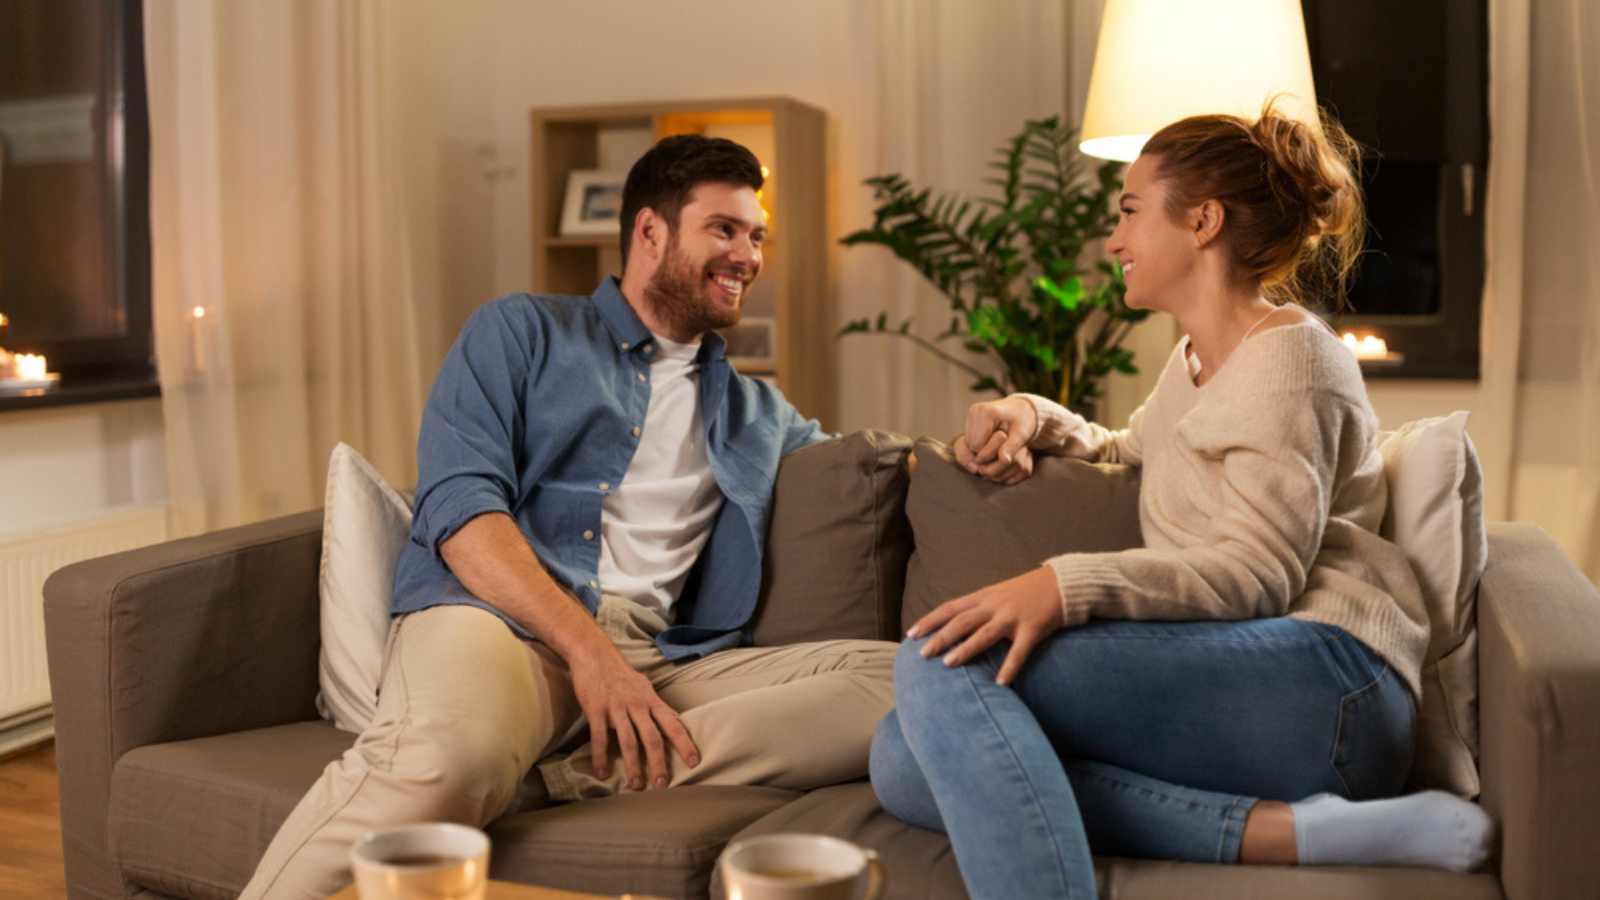 Best Dates: Couples discussing sitting on couch